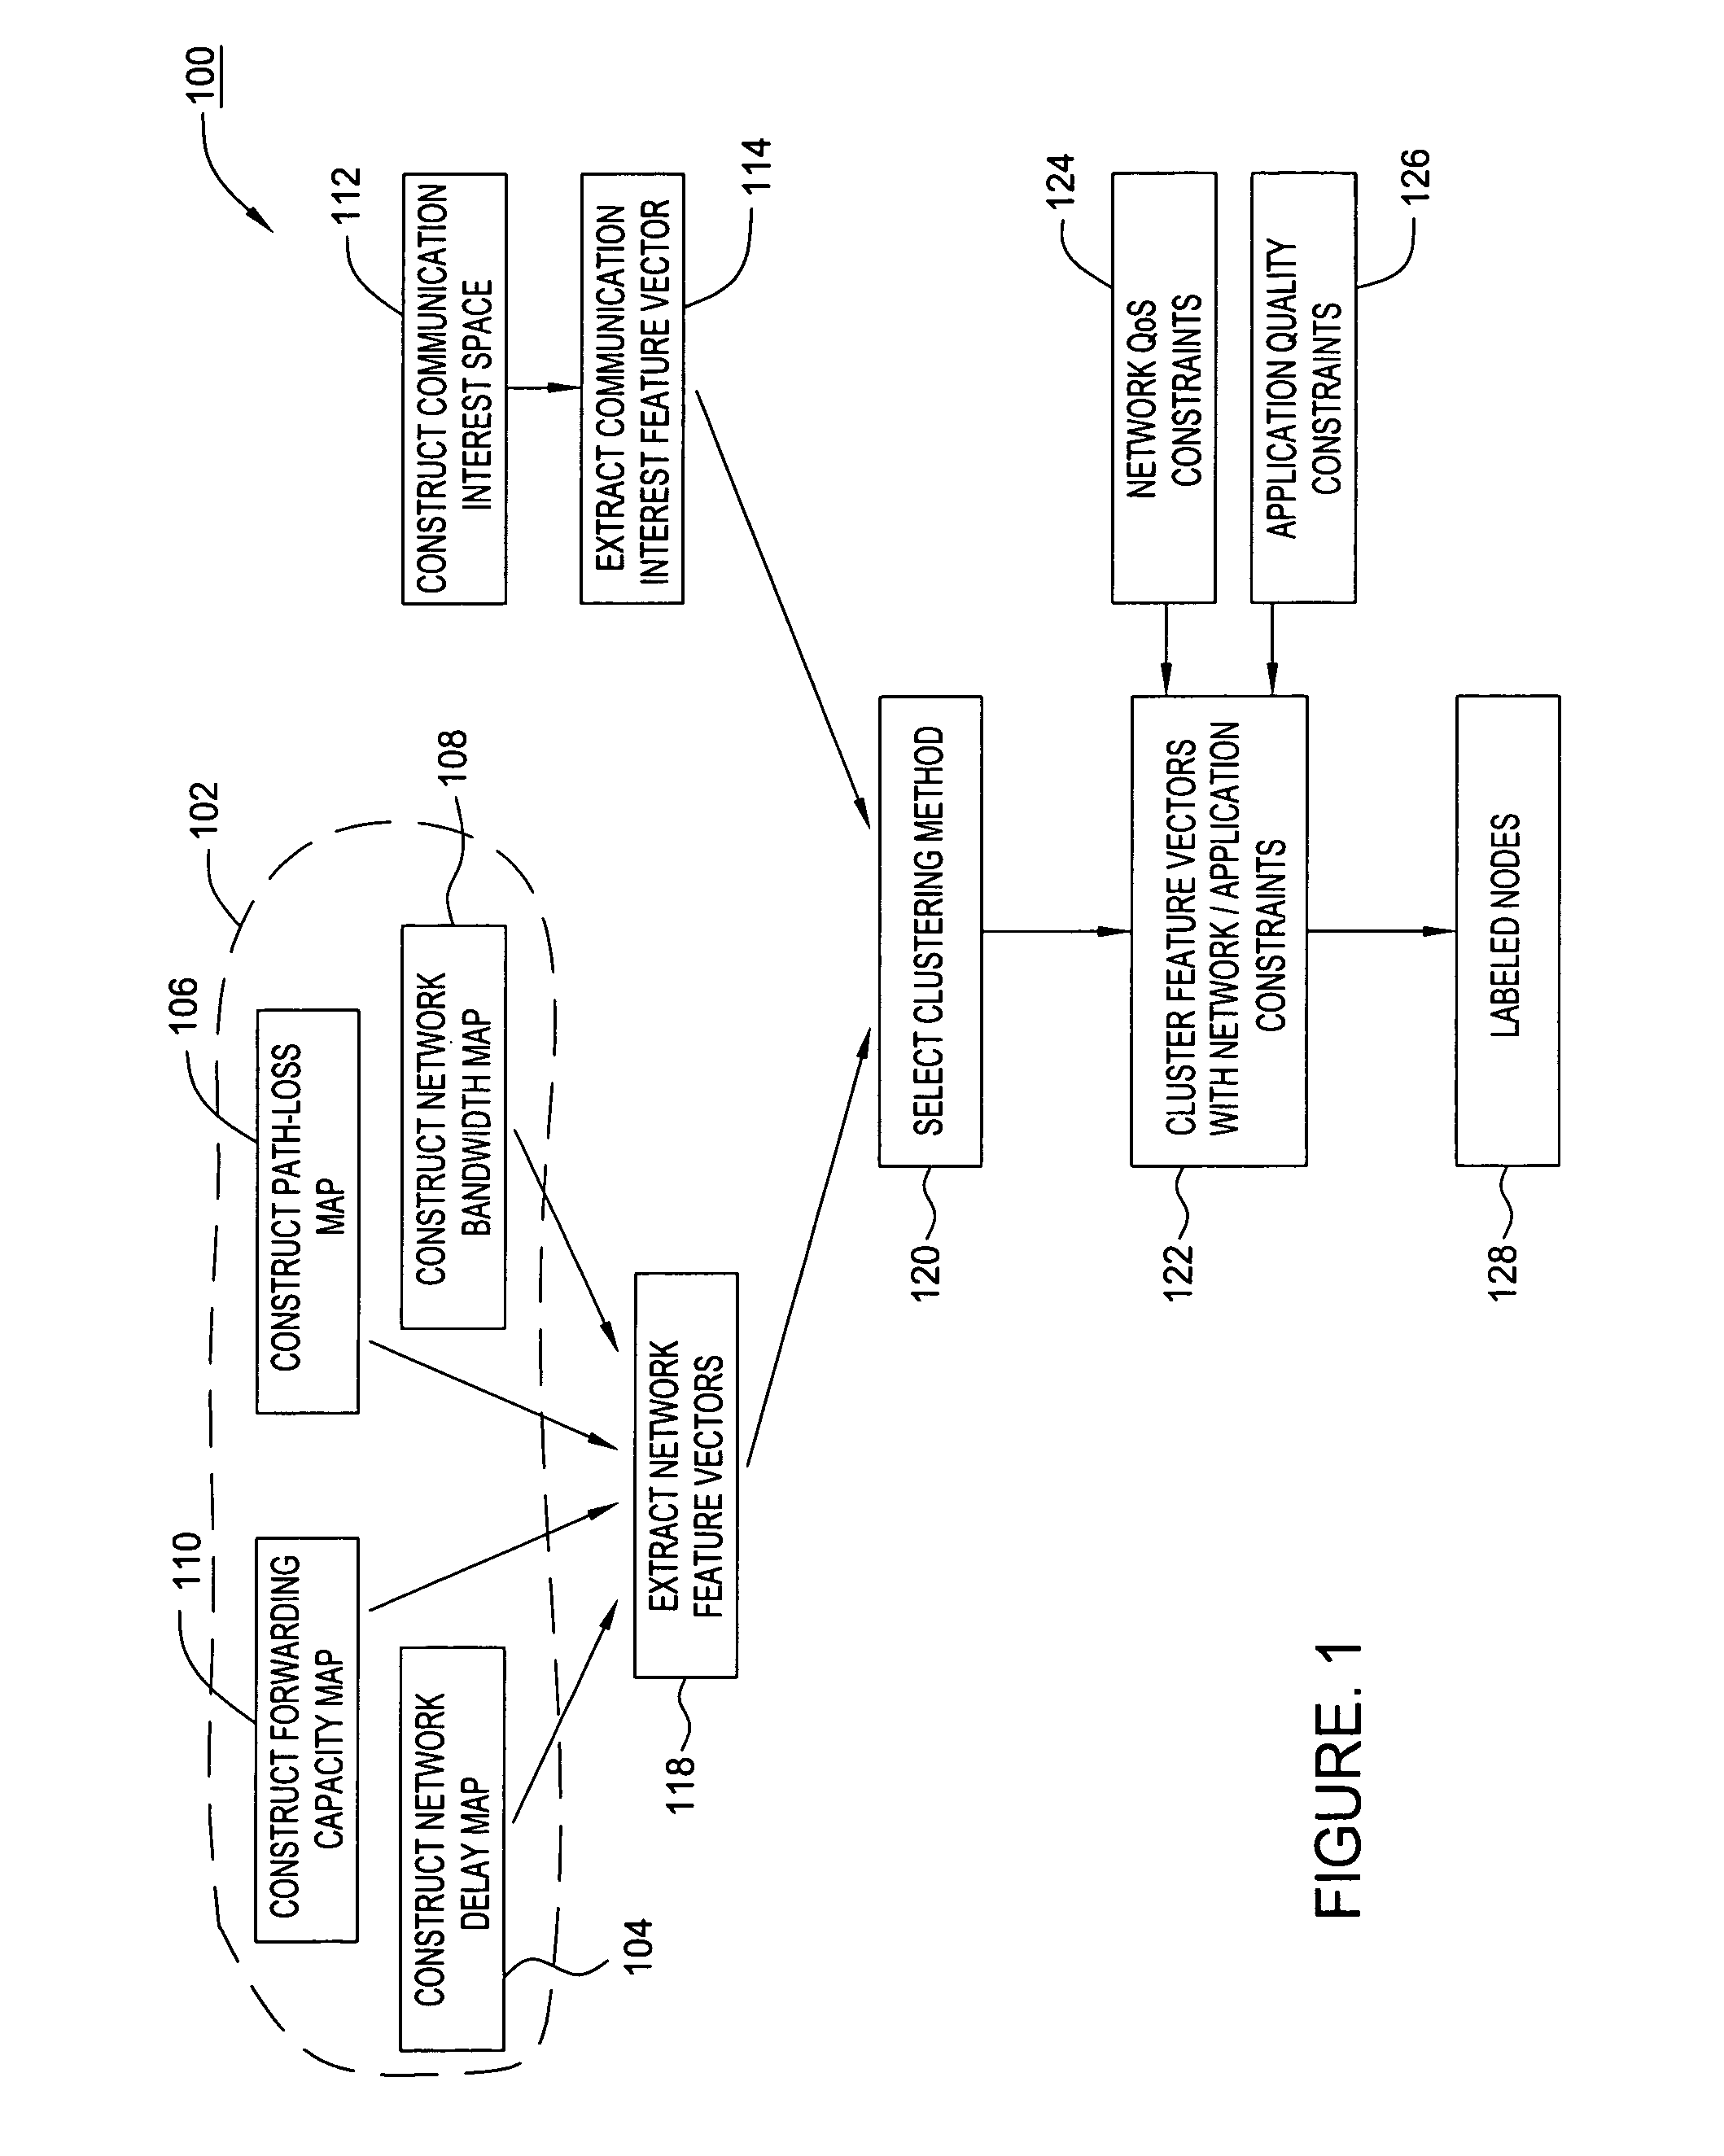 Method and apparatus to support application and network awareness of collaborative applications using multi-attribute clustering